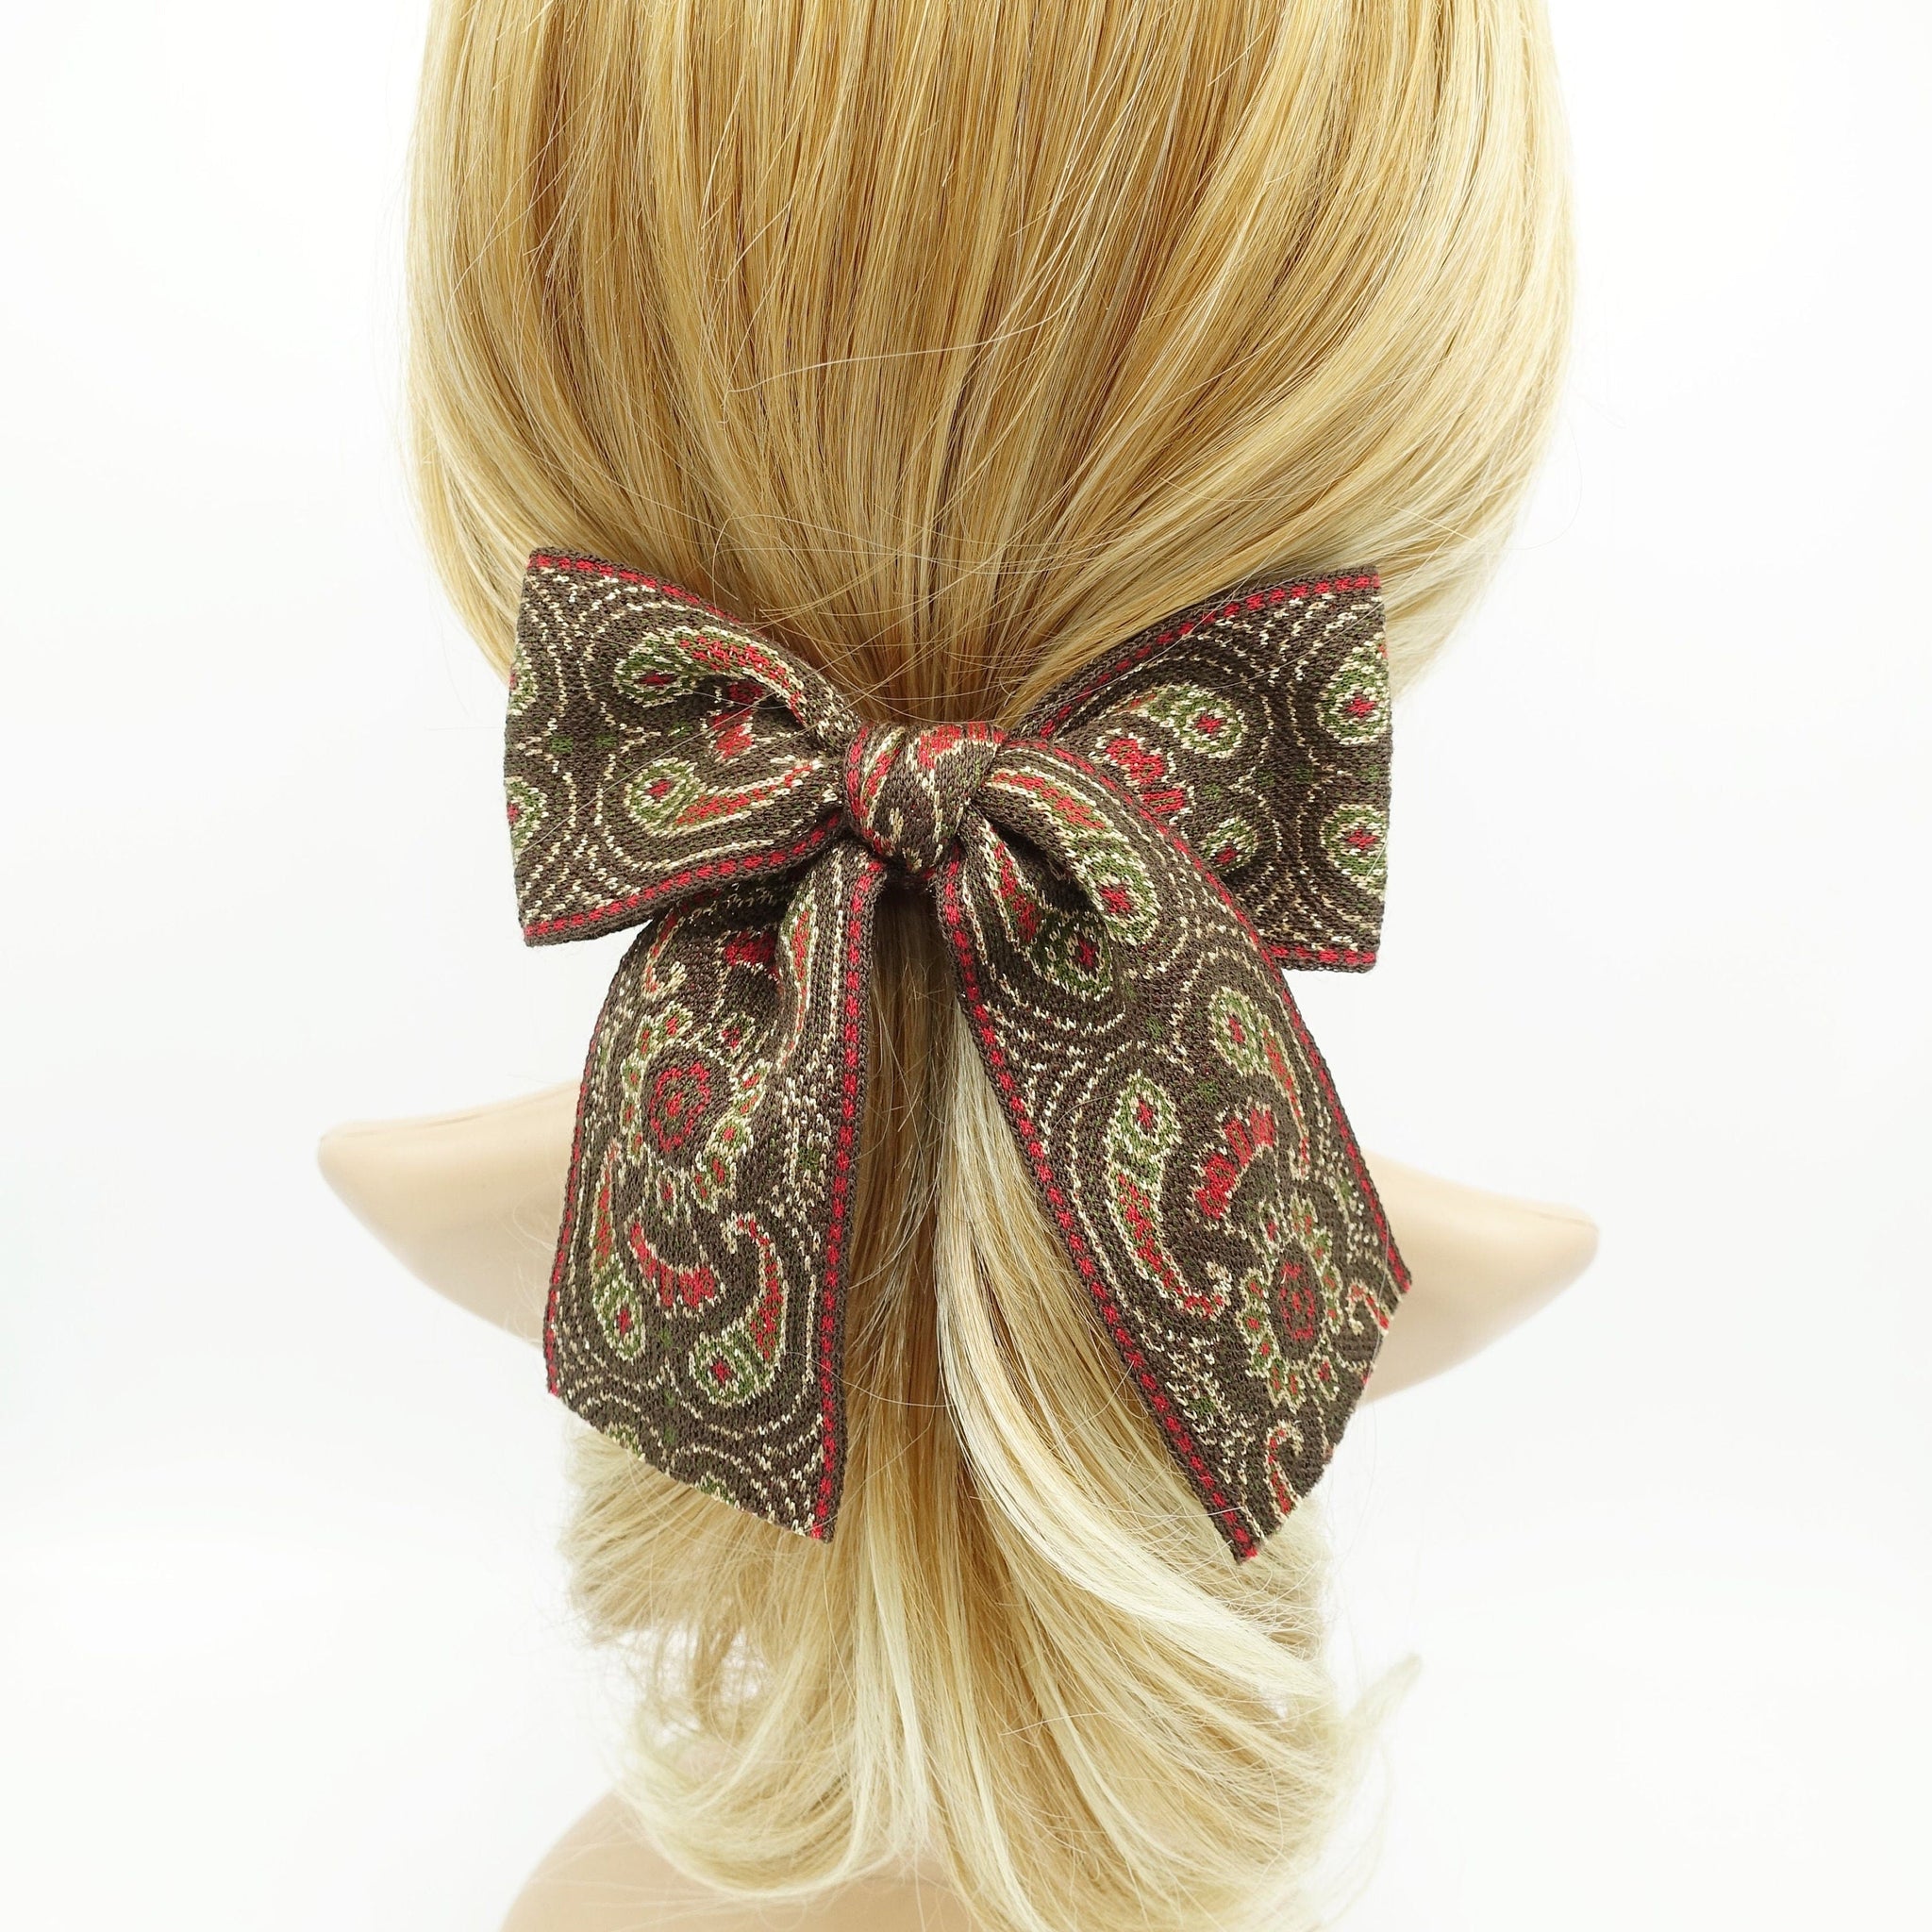 veryshine.com Barrette (Bow) Red wine baroque jacquard bow antique style pattern knit Fall Winter hair accessory for women